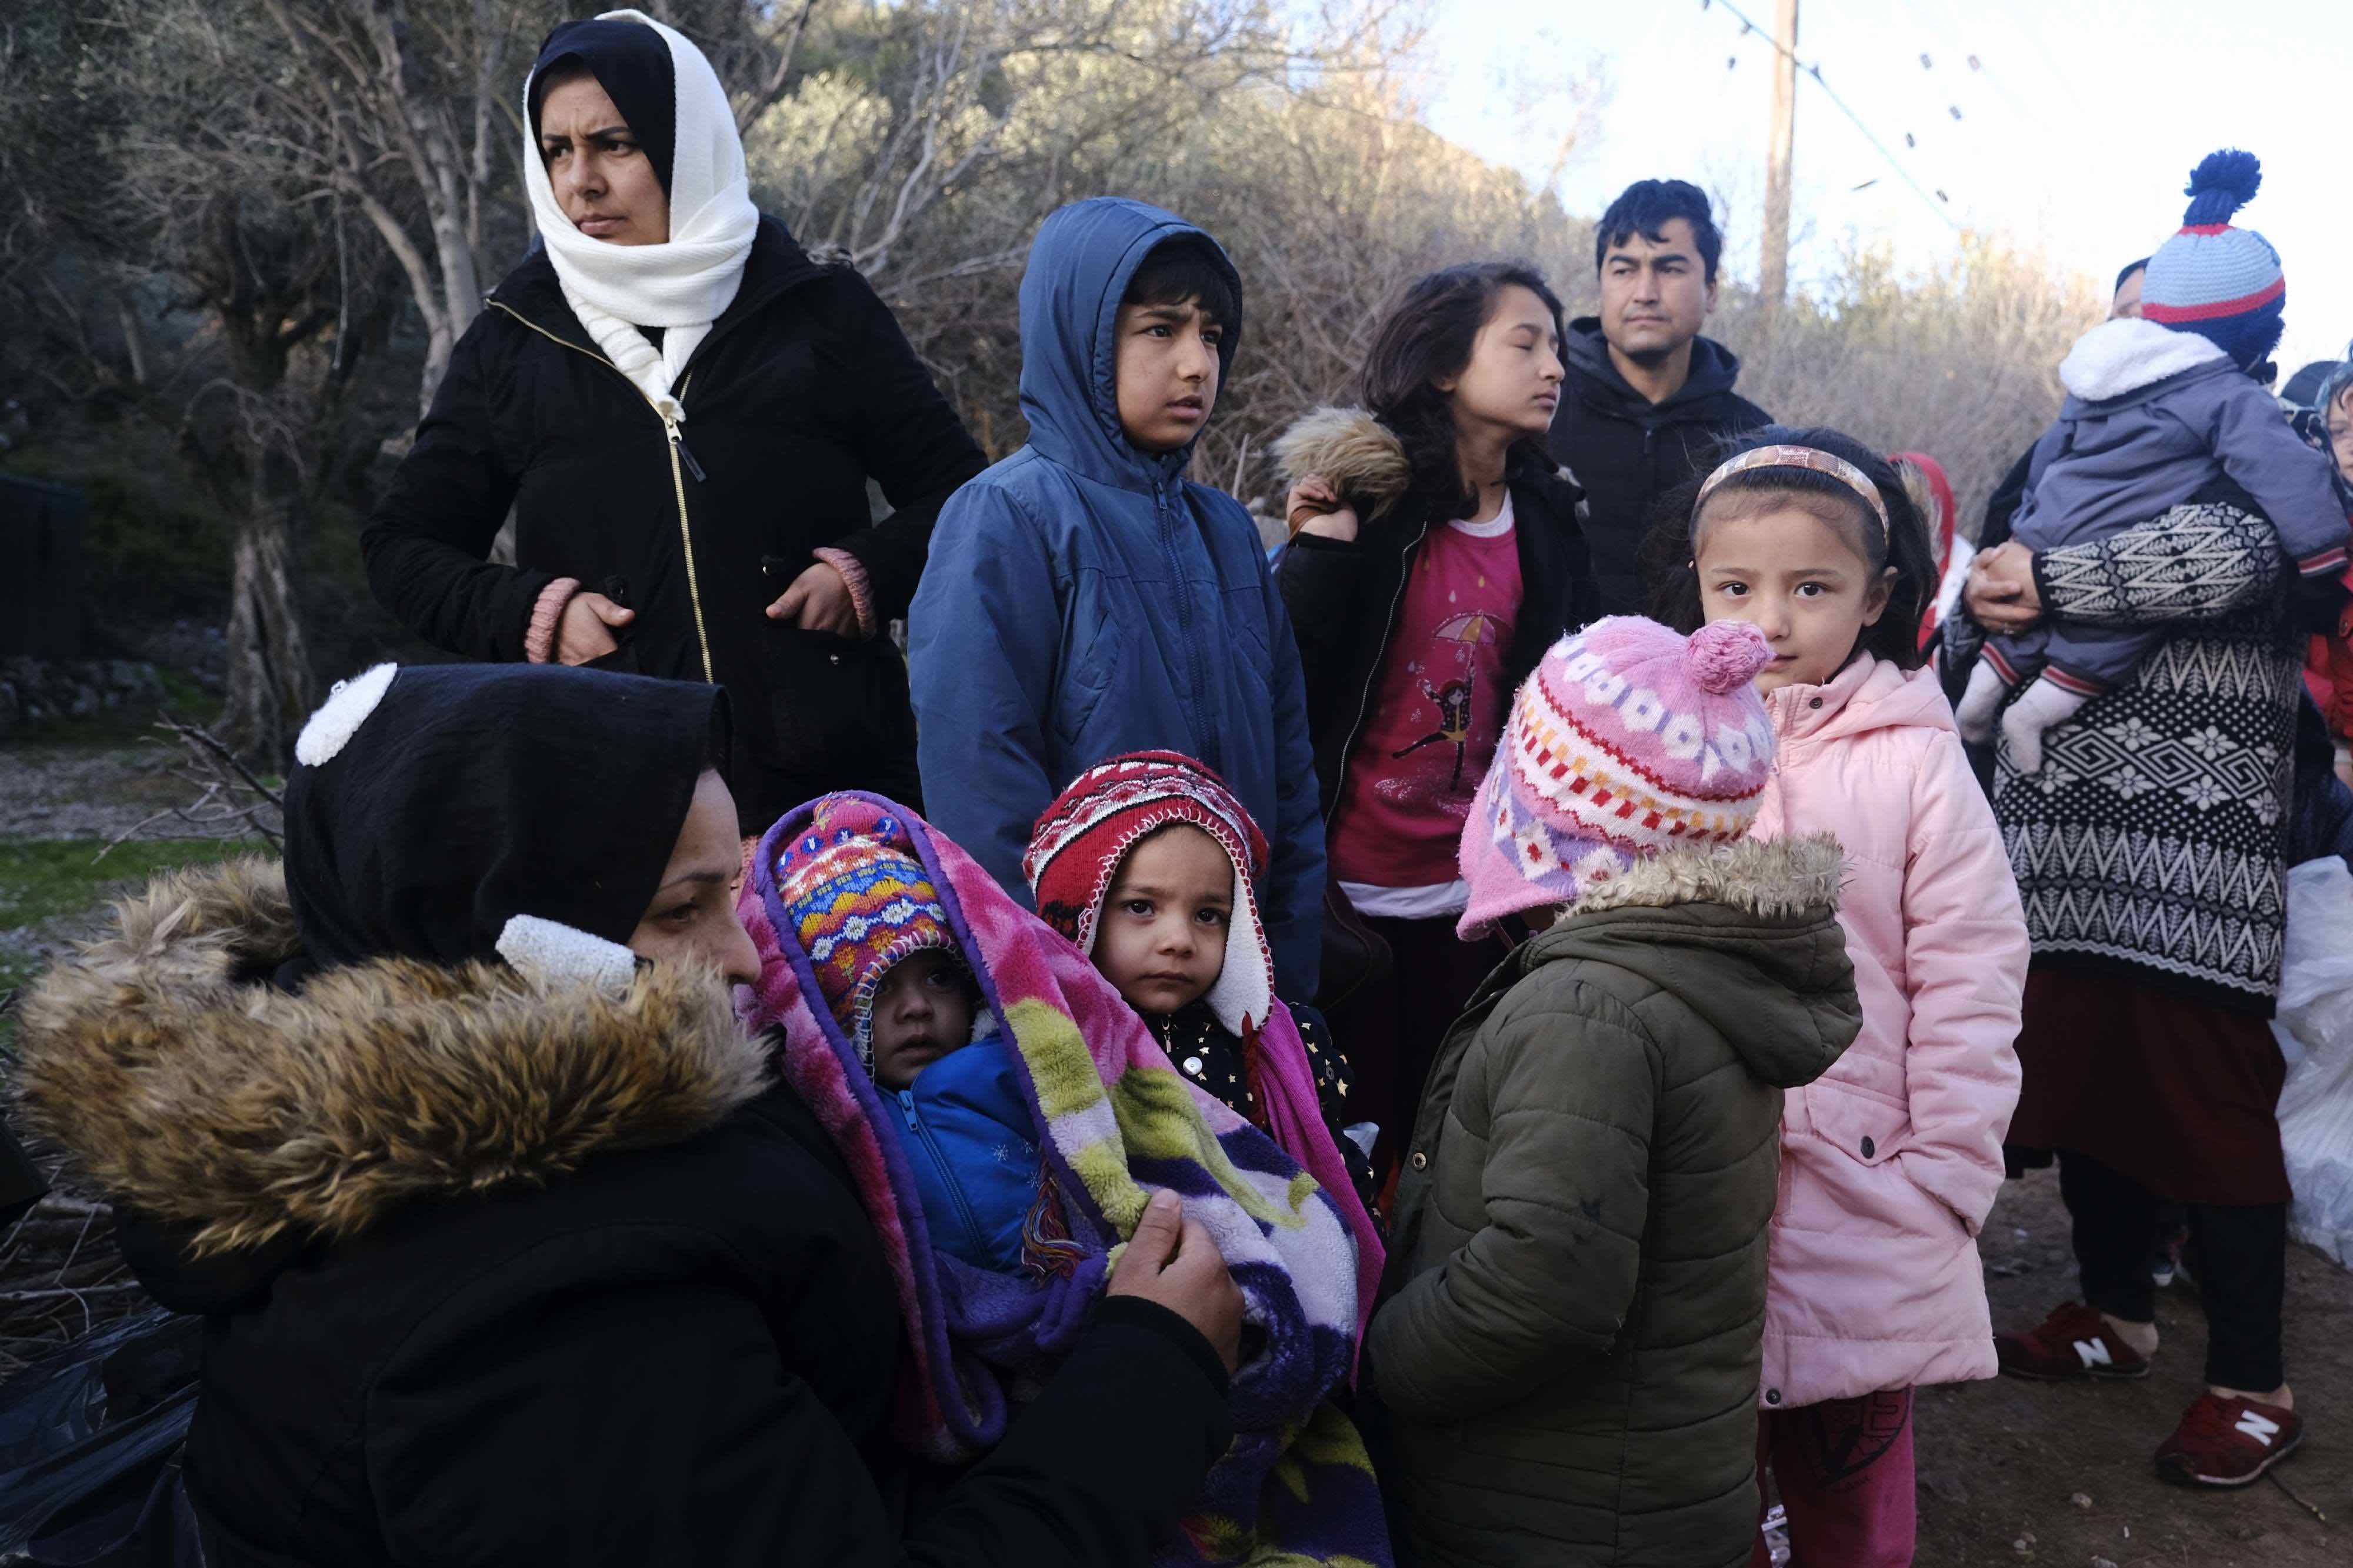 After fierce clashes with Greek police at the official crossing over the weekend, migrants said they were being dispersed along the narrow Evros river